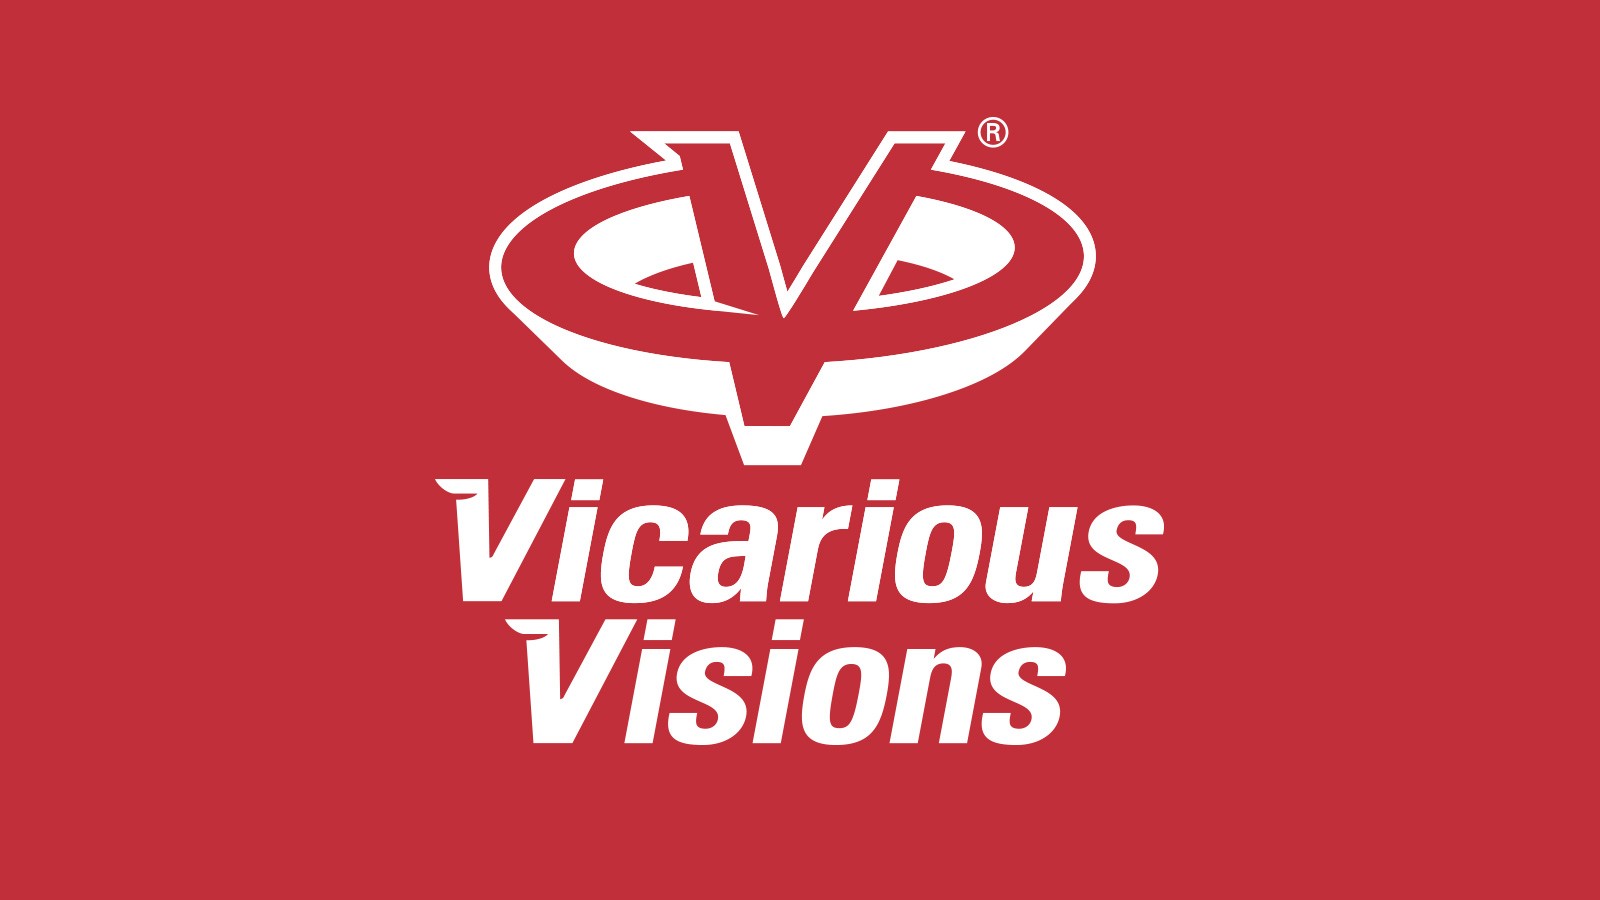 Vicarious Visions | Identity